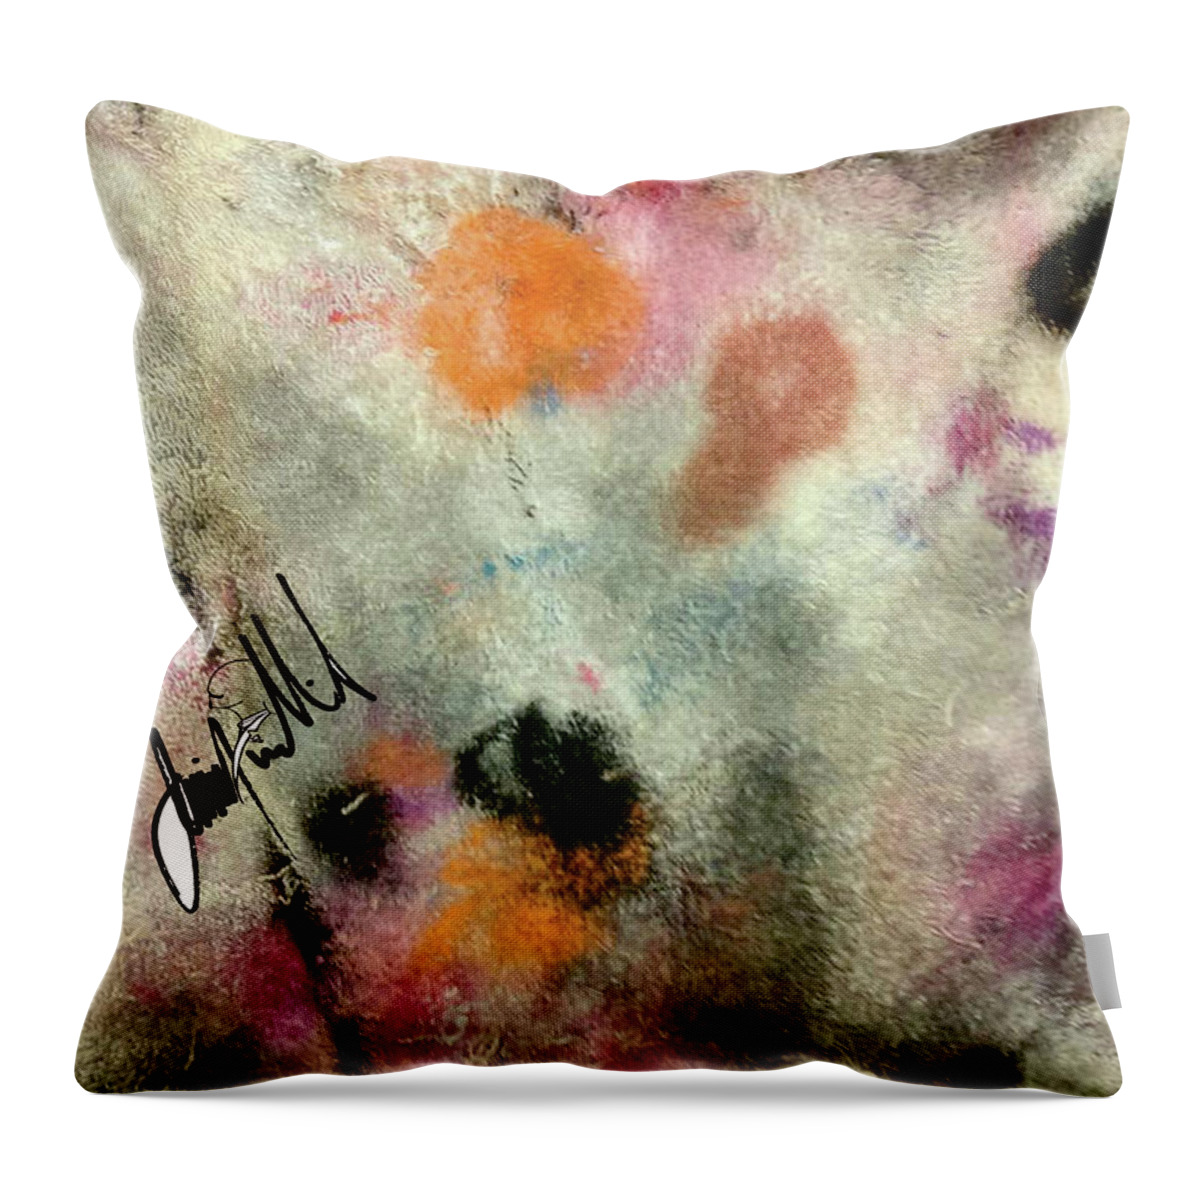  Throw Pillow featuring the digital art Towel by Jimmy Williams